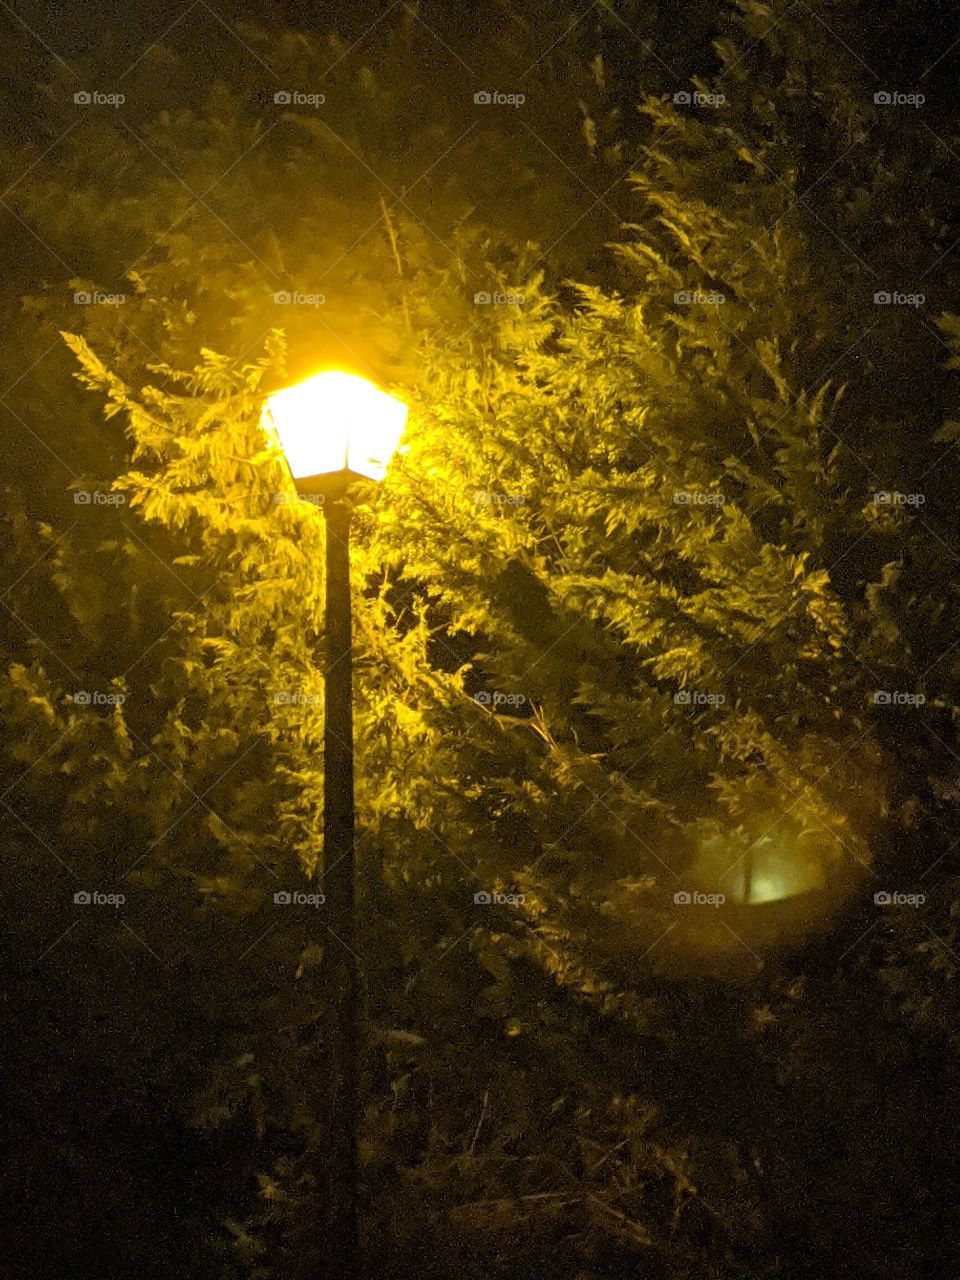 Street lamp in front of tree at night